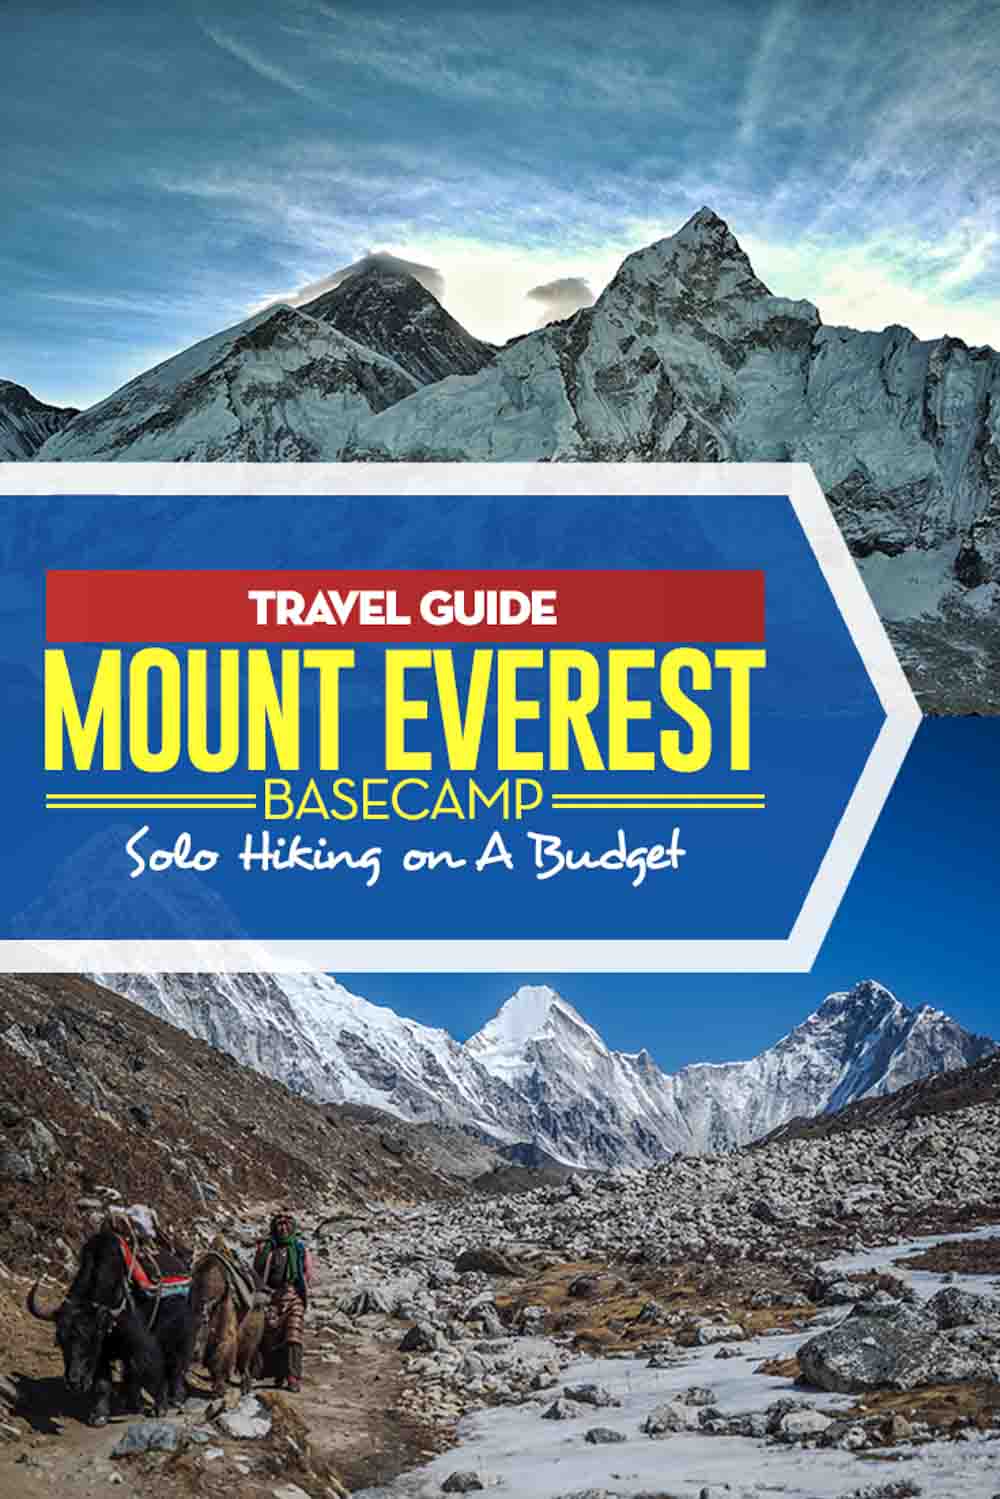 Travel Tip about how to hike to Mount Everest Basecamp in Nepal on a budget. #nepal #hiking #mountain #travel #travelblogger #travelblog #traveltips